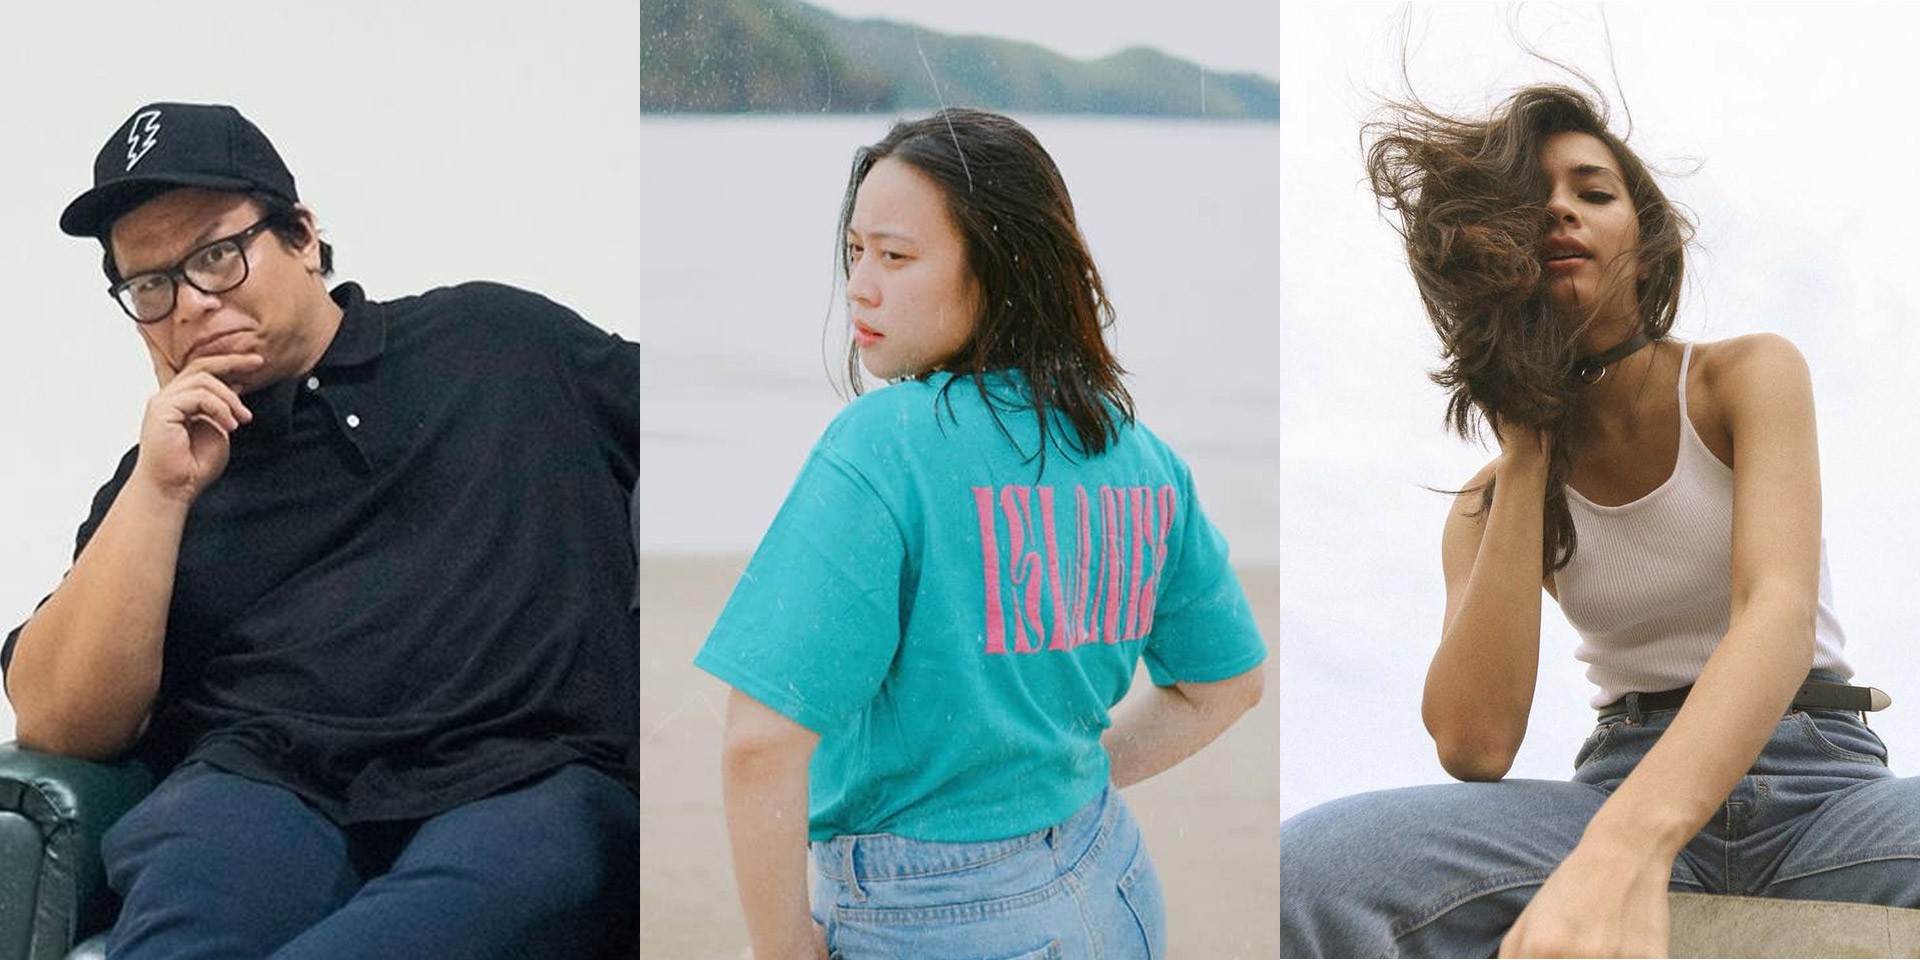 Jazz Nicolas, Reese Lansangan, and Valentina Ploy to perform at Indie Manila's first edition of SUBDUED Online